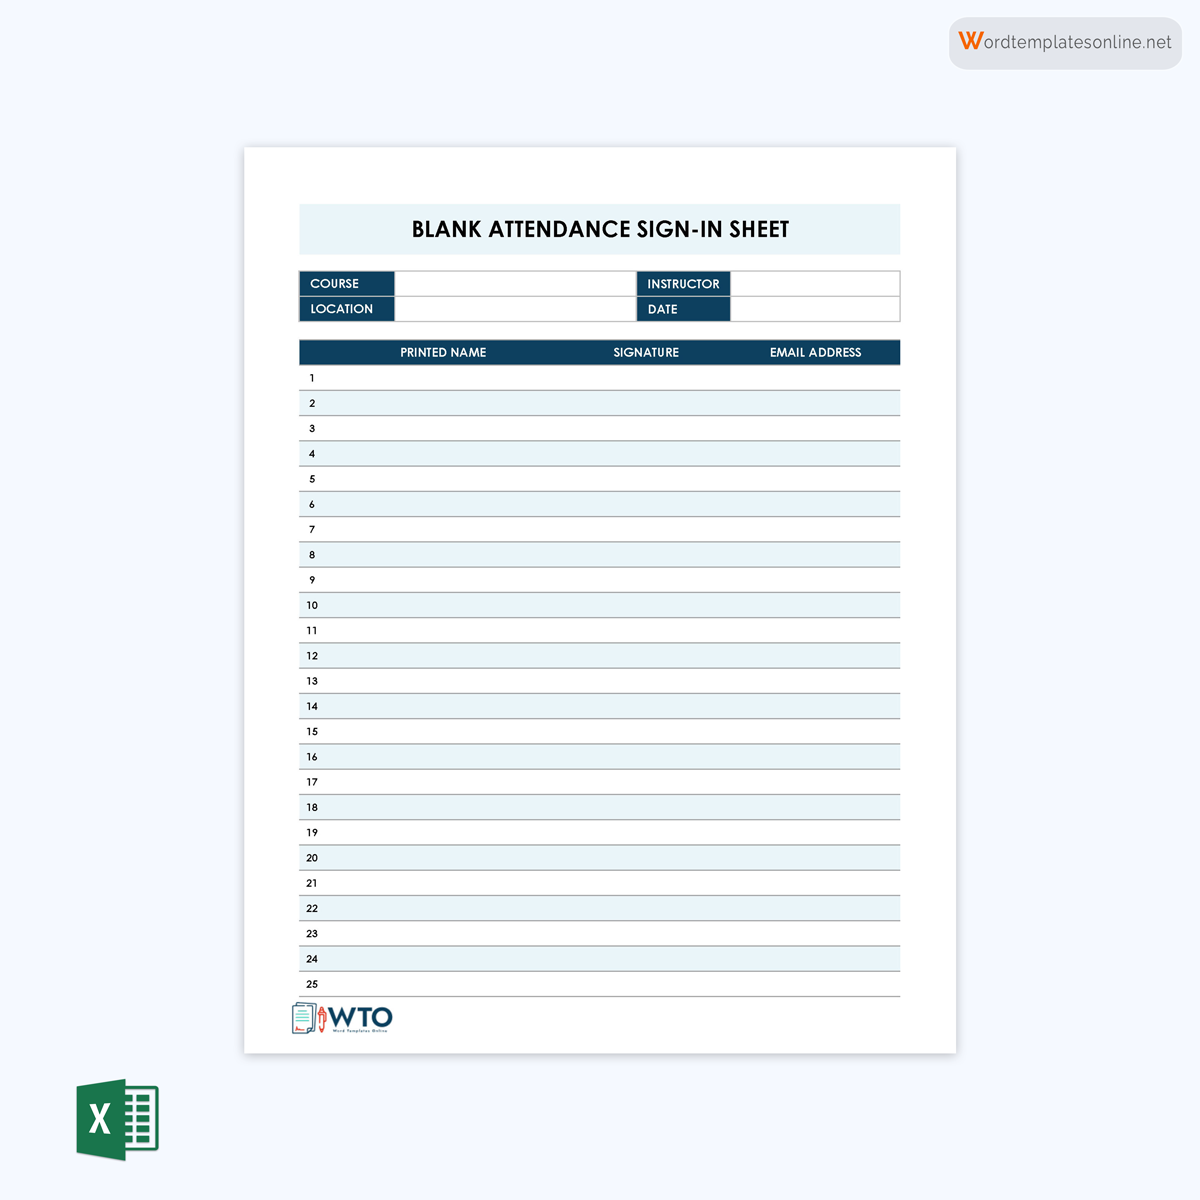 Free Blank Attendance Sign-In Sheet in Excel